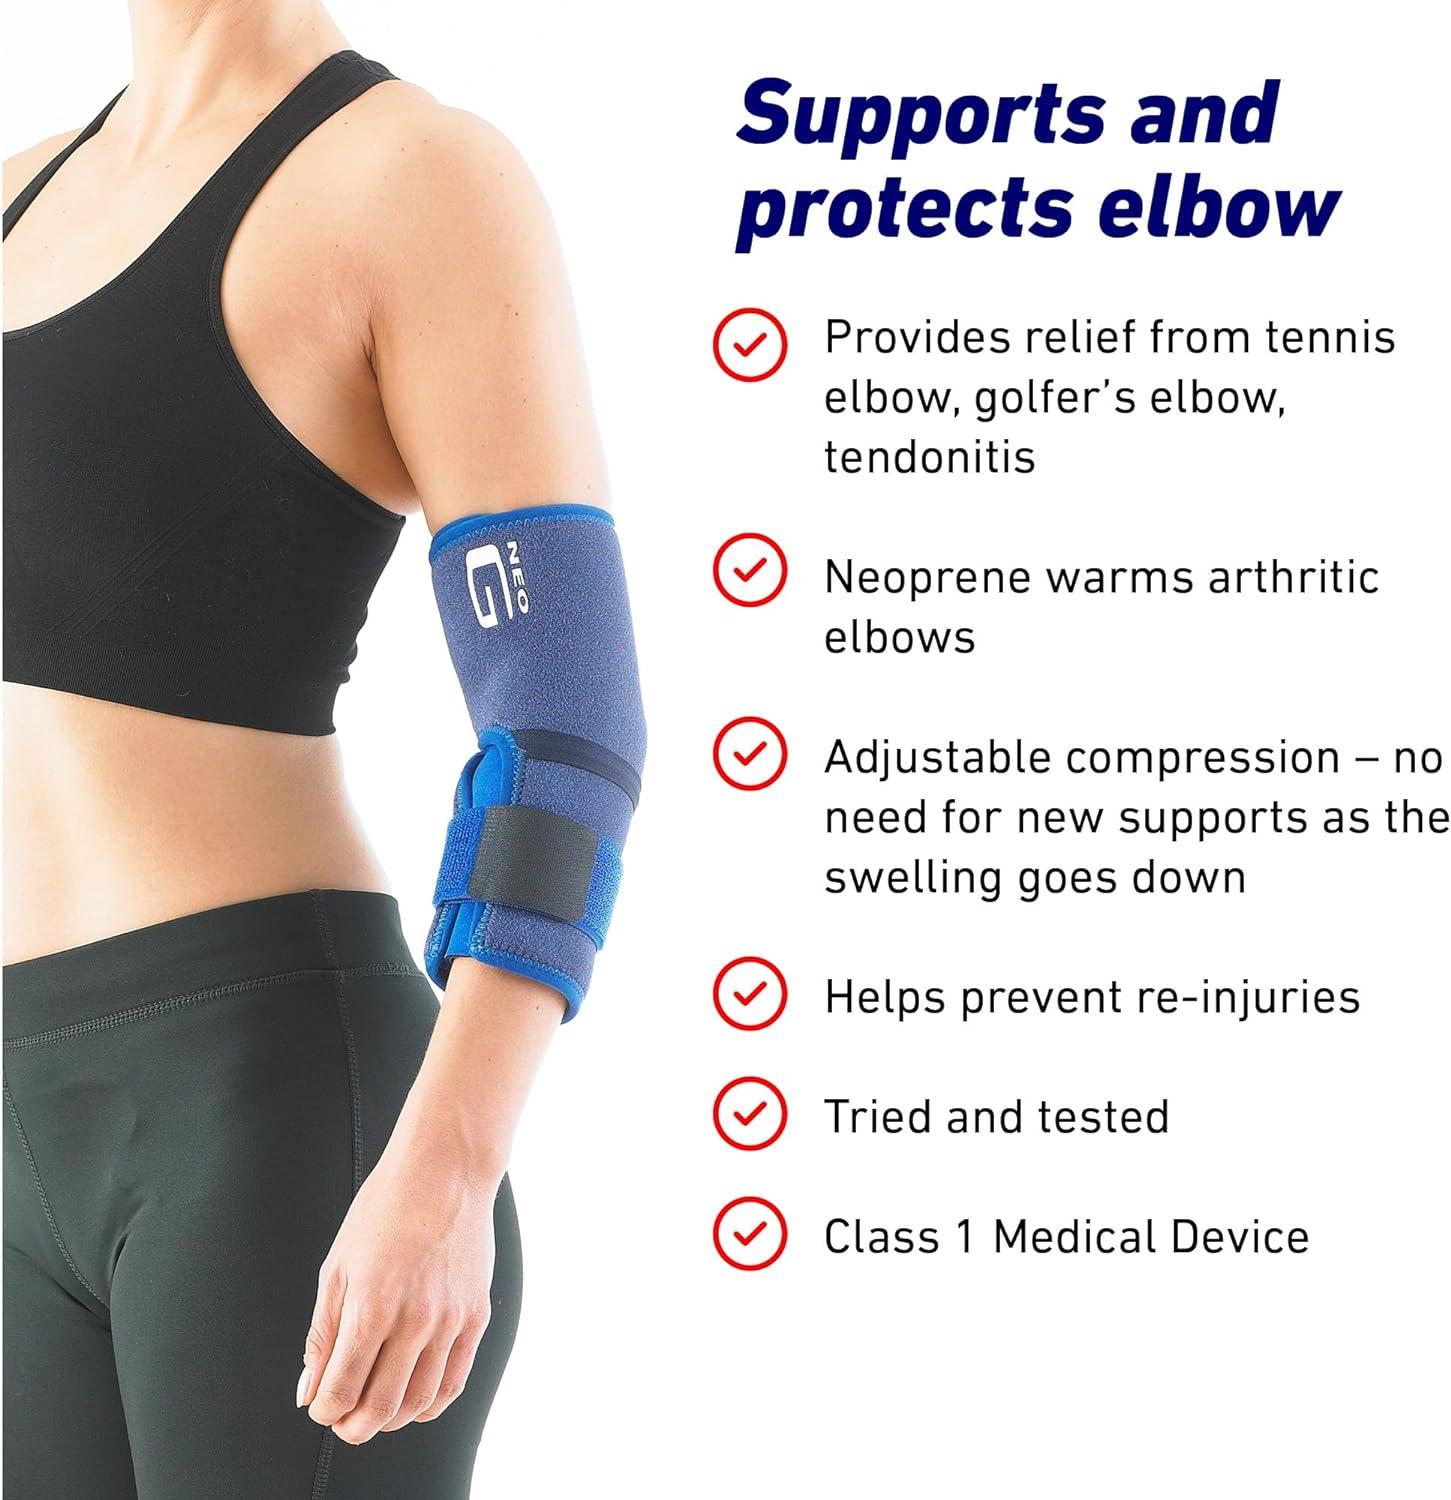 NEO G Thigh & Hamstring Support - Medical Grade Quality HELPS quadriceps  and hamstring strains, sprains, pain muscle overuse, rehabilitation -  Everyday or sporting injuries - ONE SIZE Unisex Brace : 